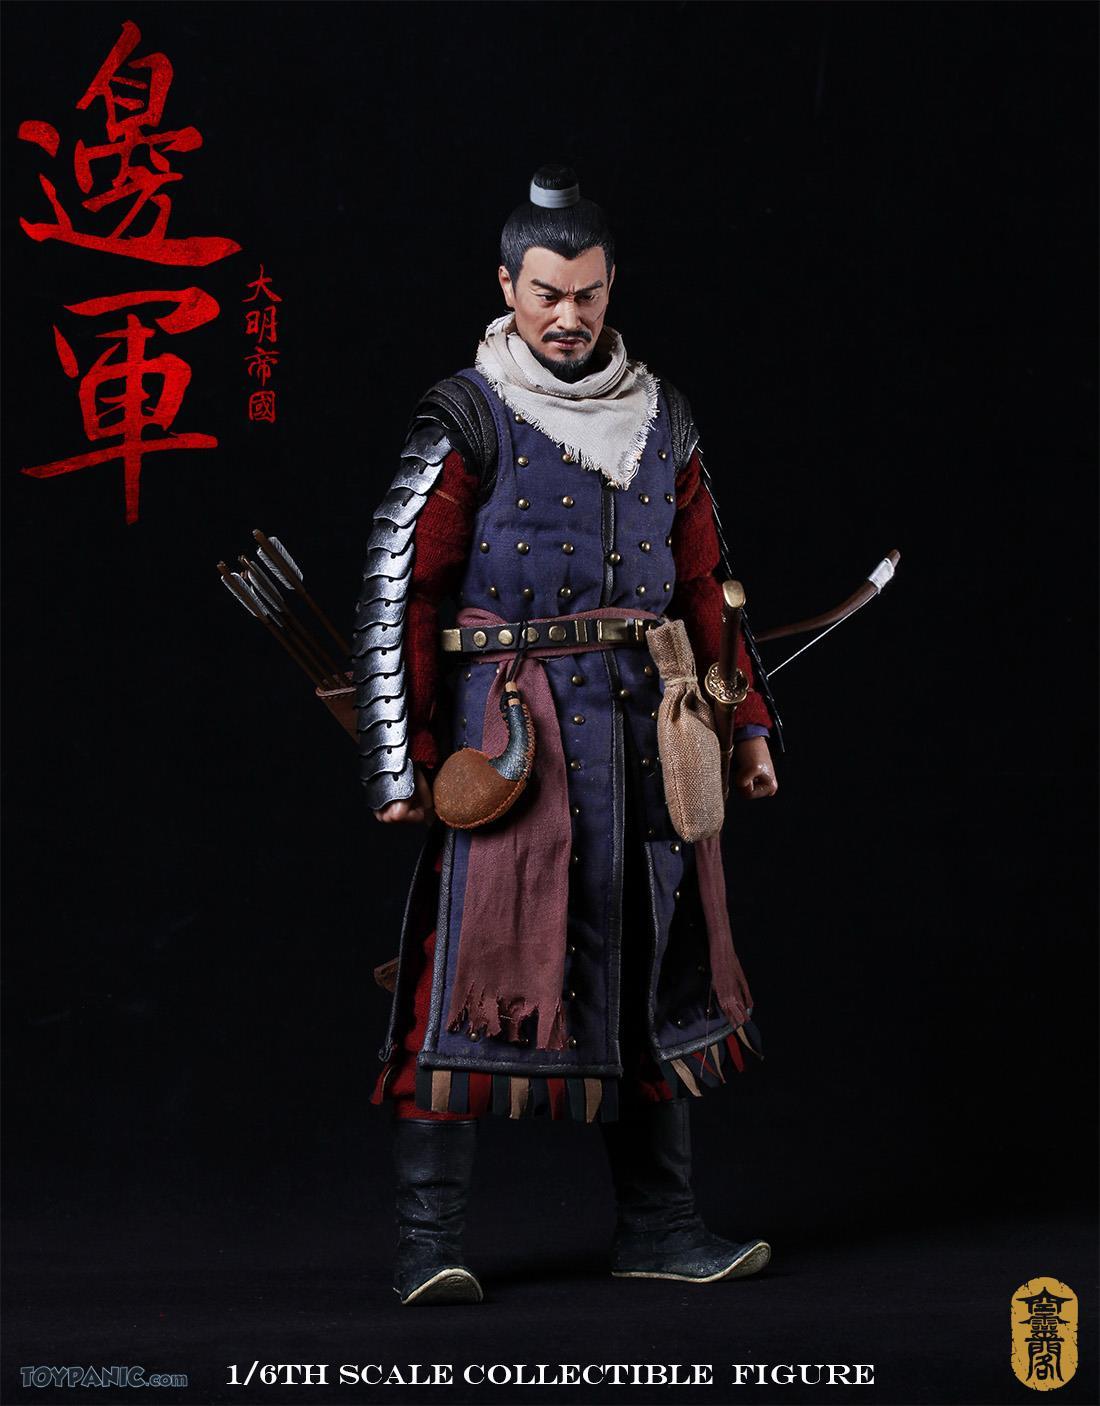 military - NEW PRODUCT: Sonder: 1/6 Song Dynasty Series-Yue Jiaxing Yang Zaixing Action Figure (SD005#) 1223201650535PM_35